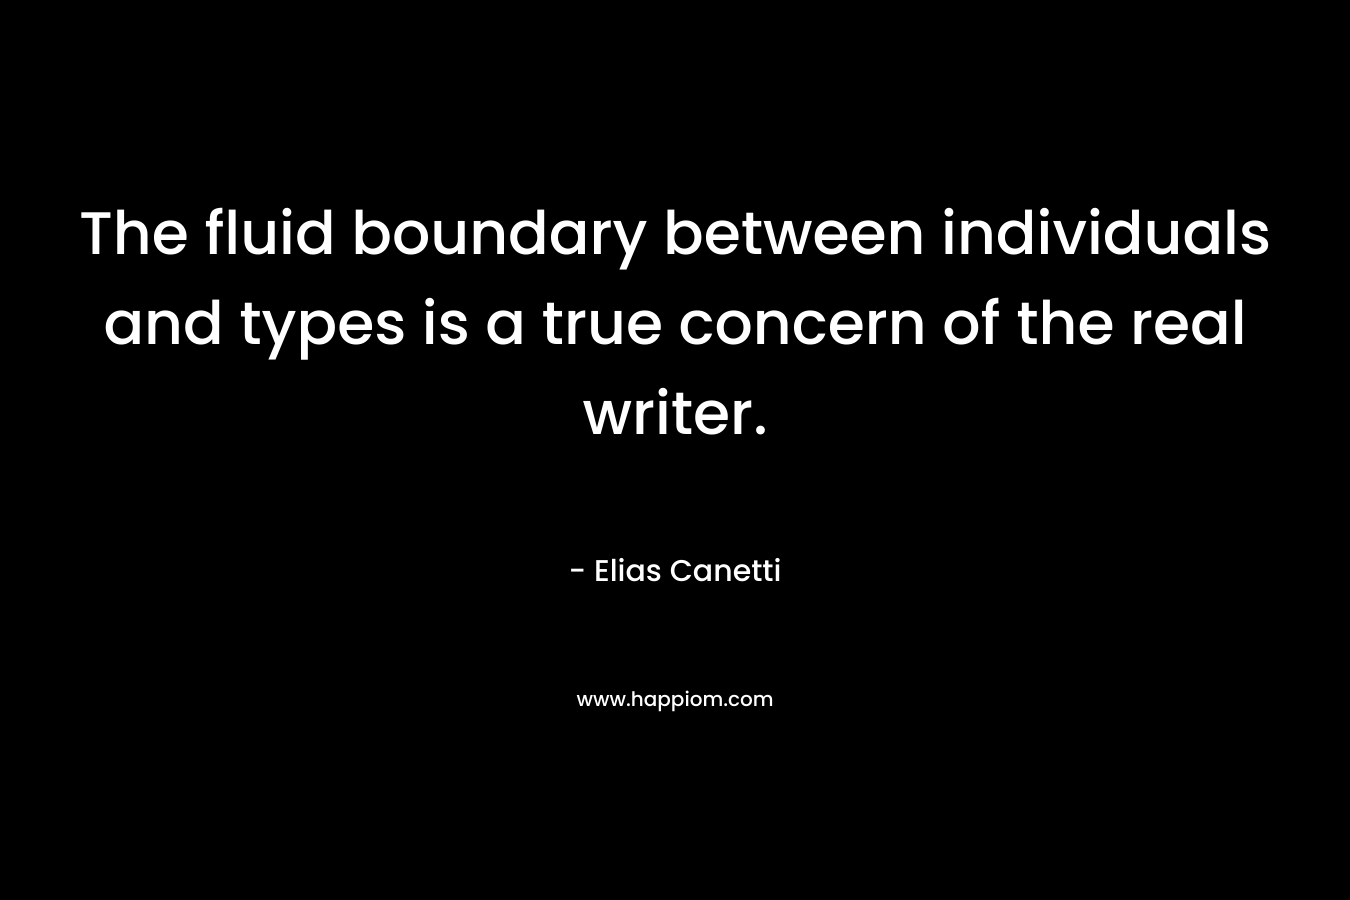 The fluid boundary between individuals and types is a true concern of the real writer.